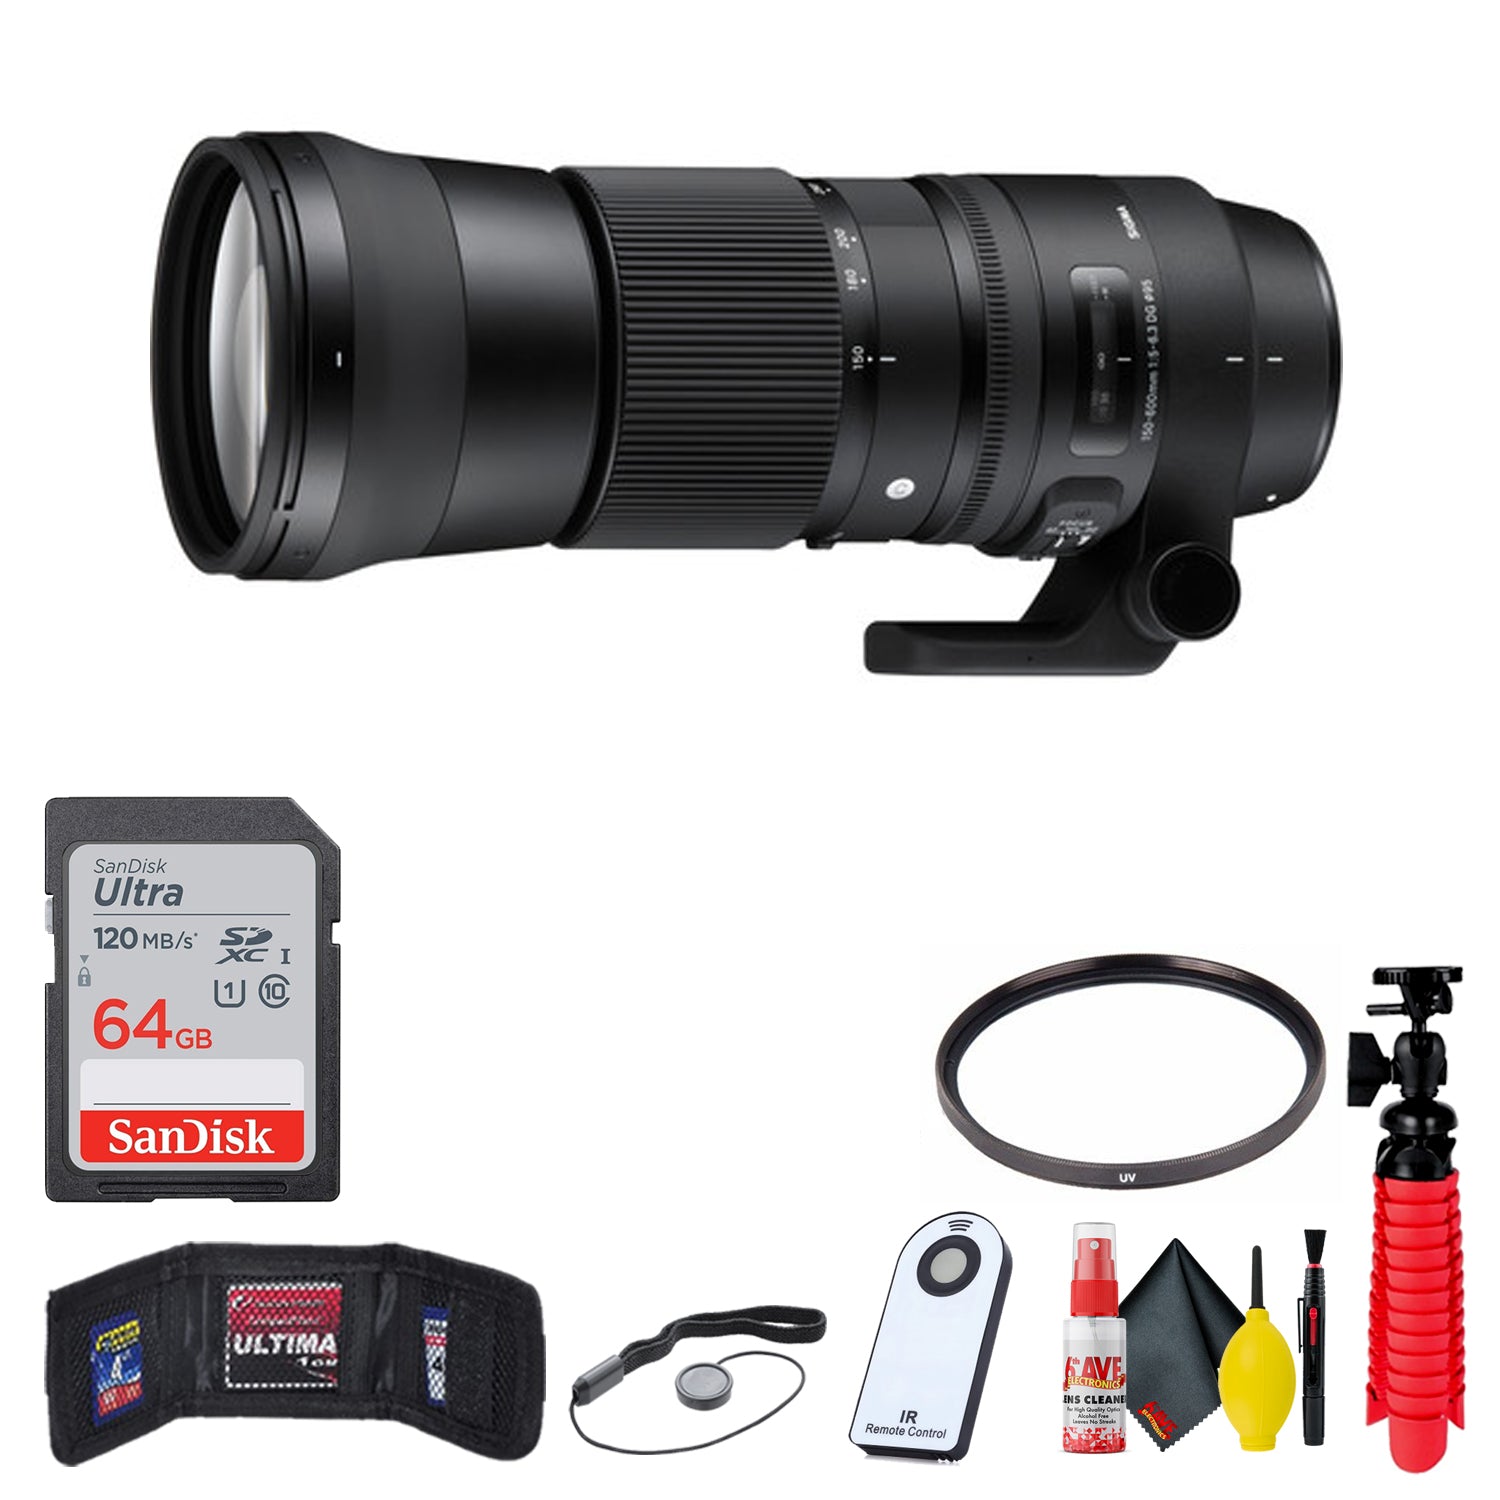 Sigma 150-600mm f/5-6.3 DG OS HSM Contemporary Lens for Canon EF Ultra Bundle